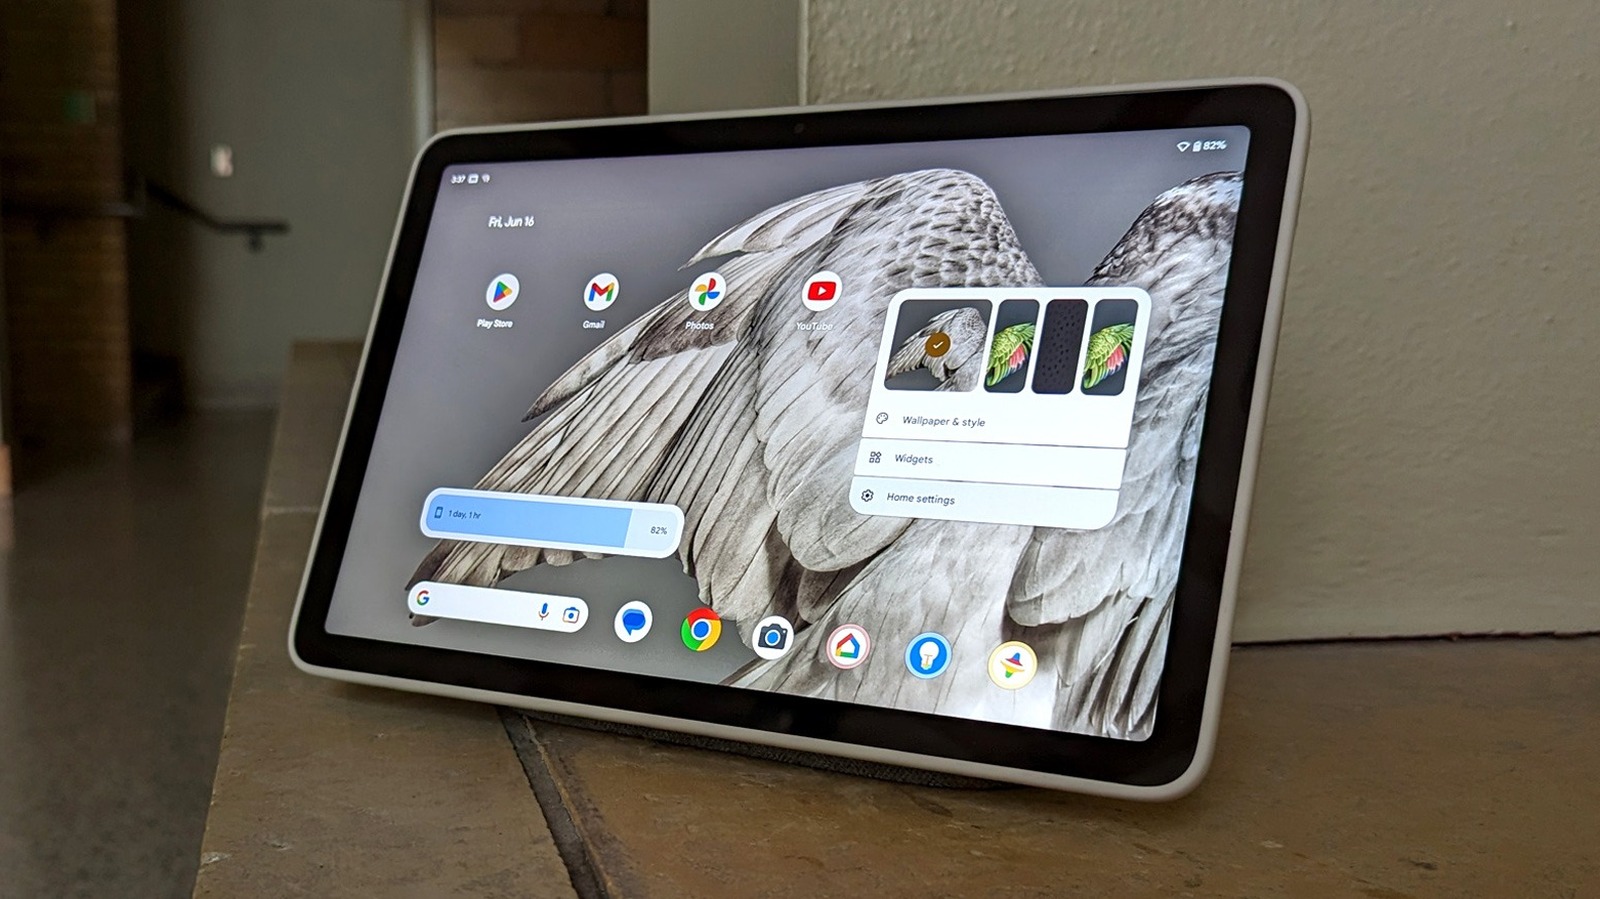 Google Pixel Tablet: everything you need to know